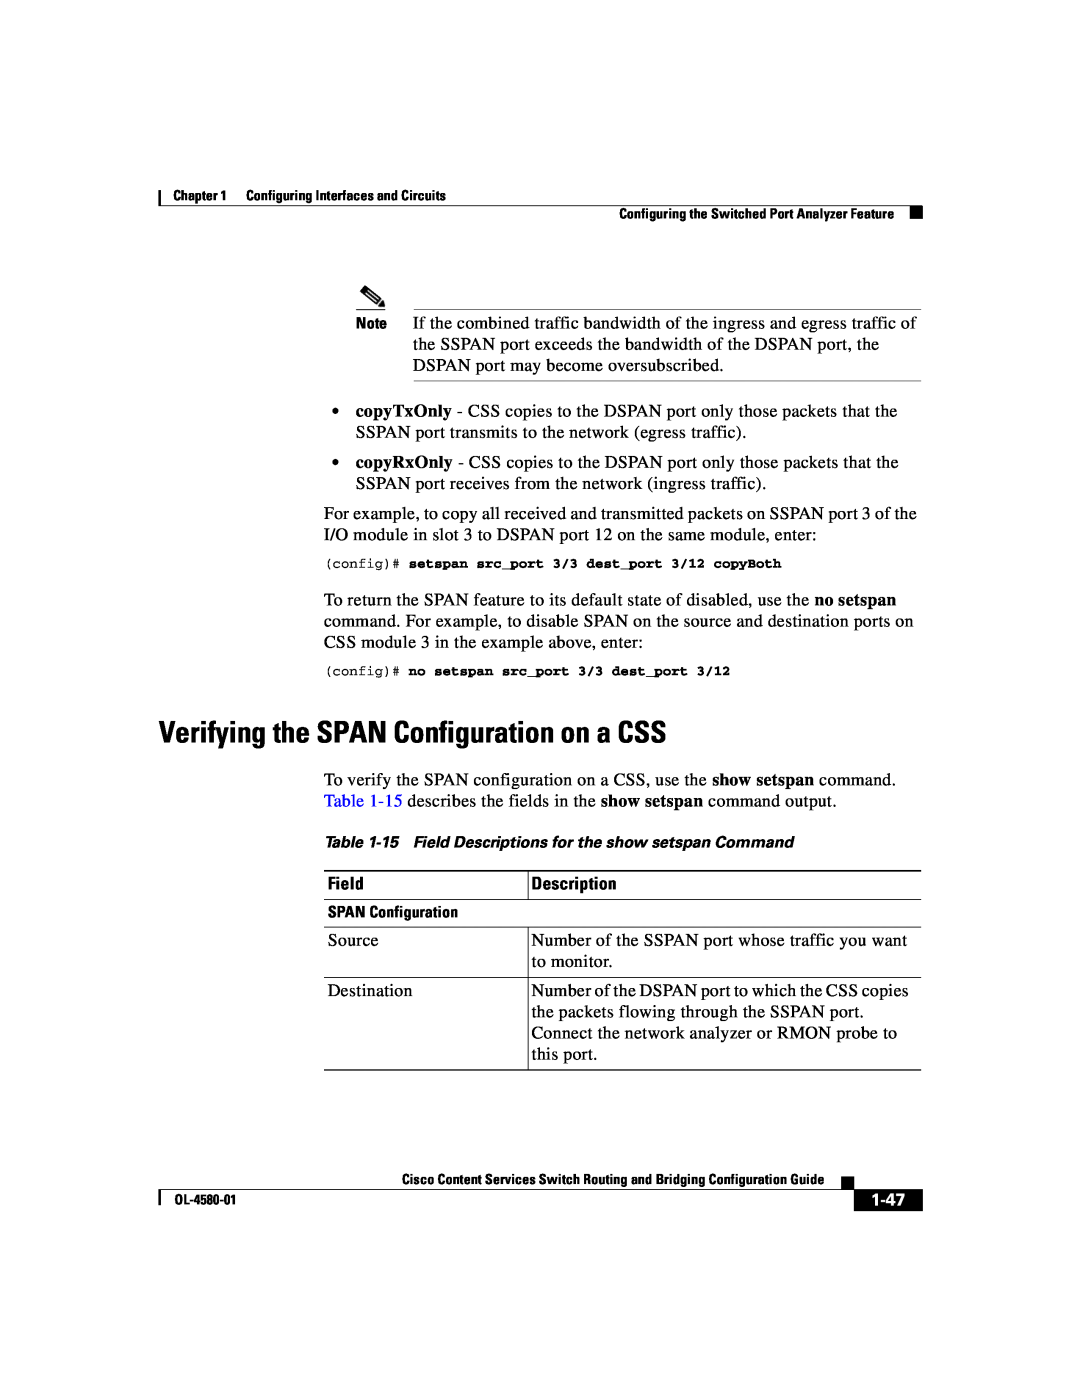 Cisco Systems OL-4580-01 manual Verifying the SPAN Configuration on a CSS, Field, Description, 1-47 